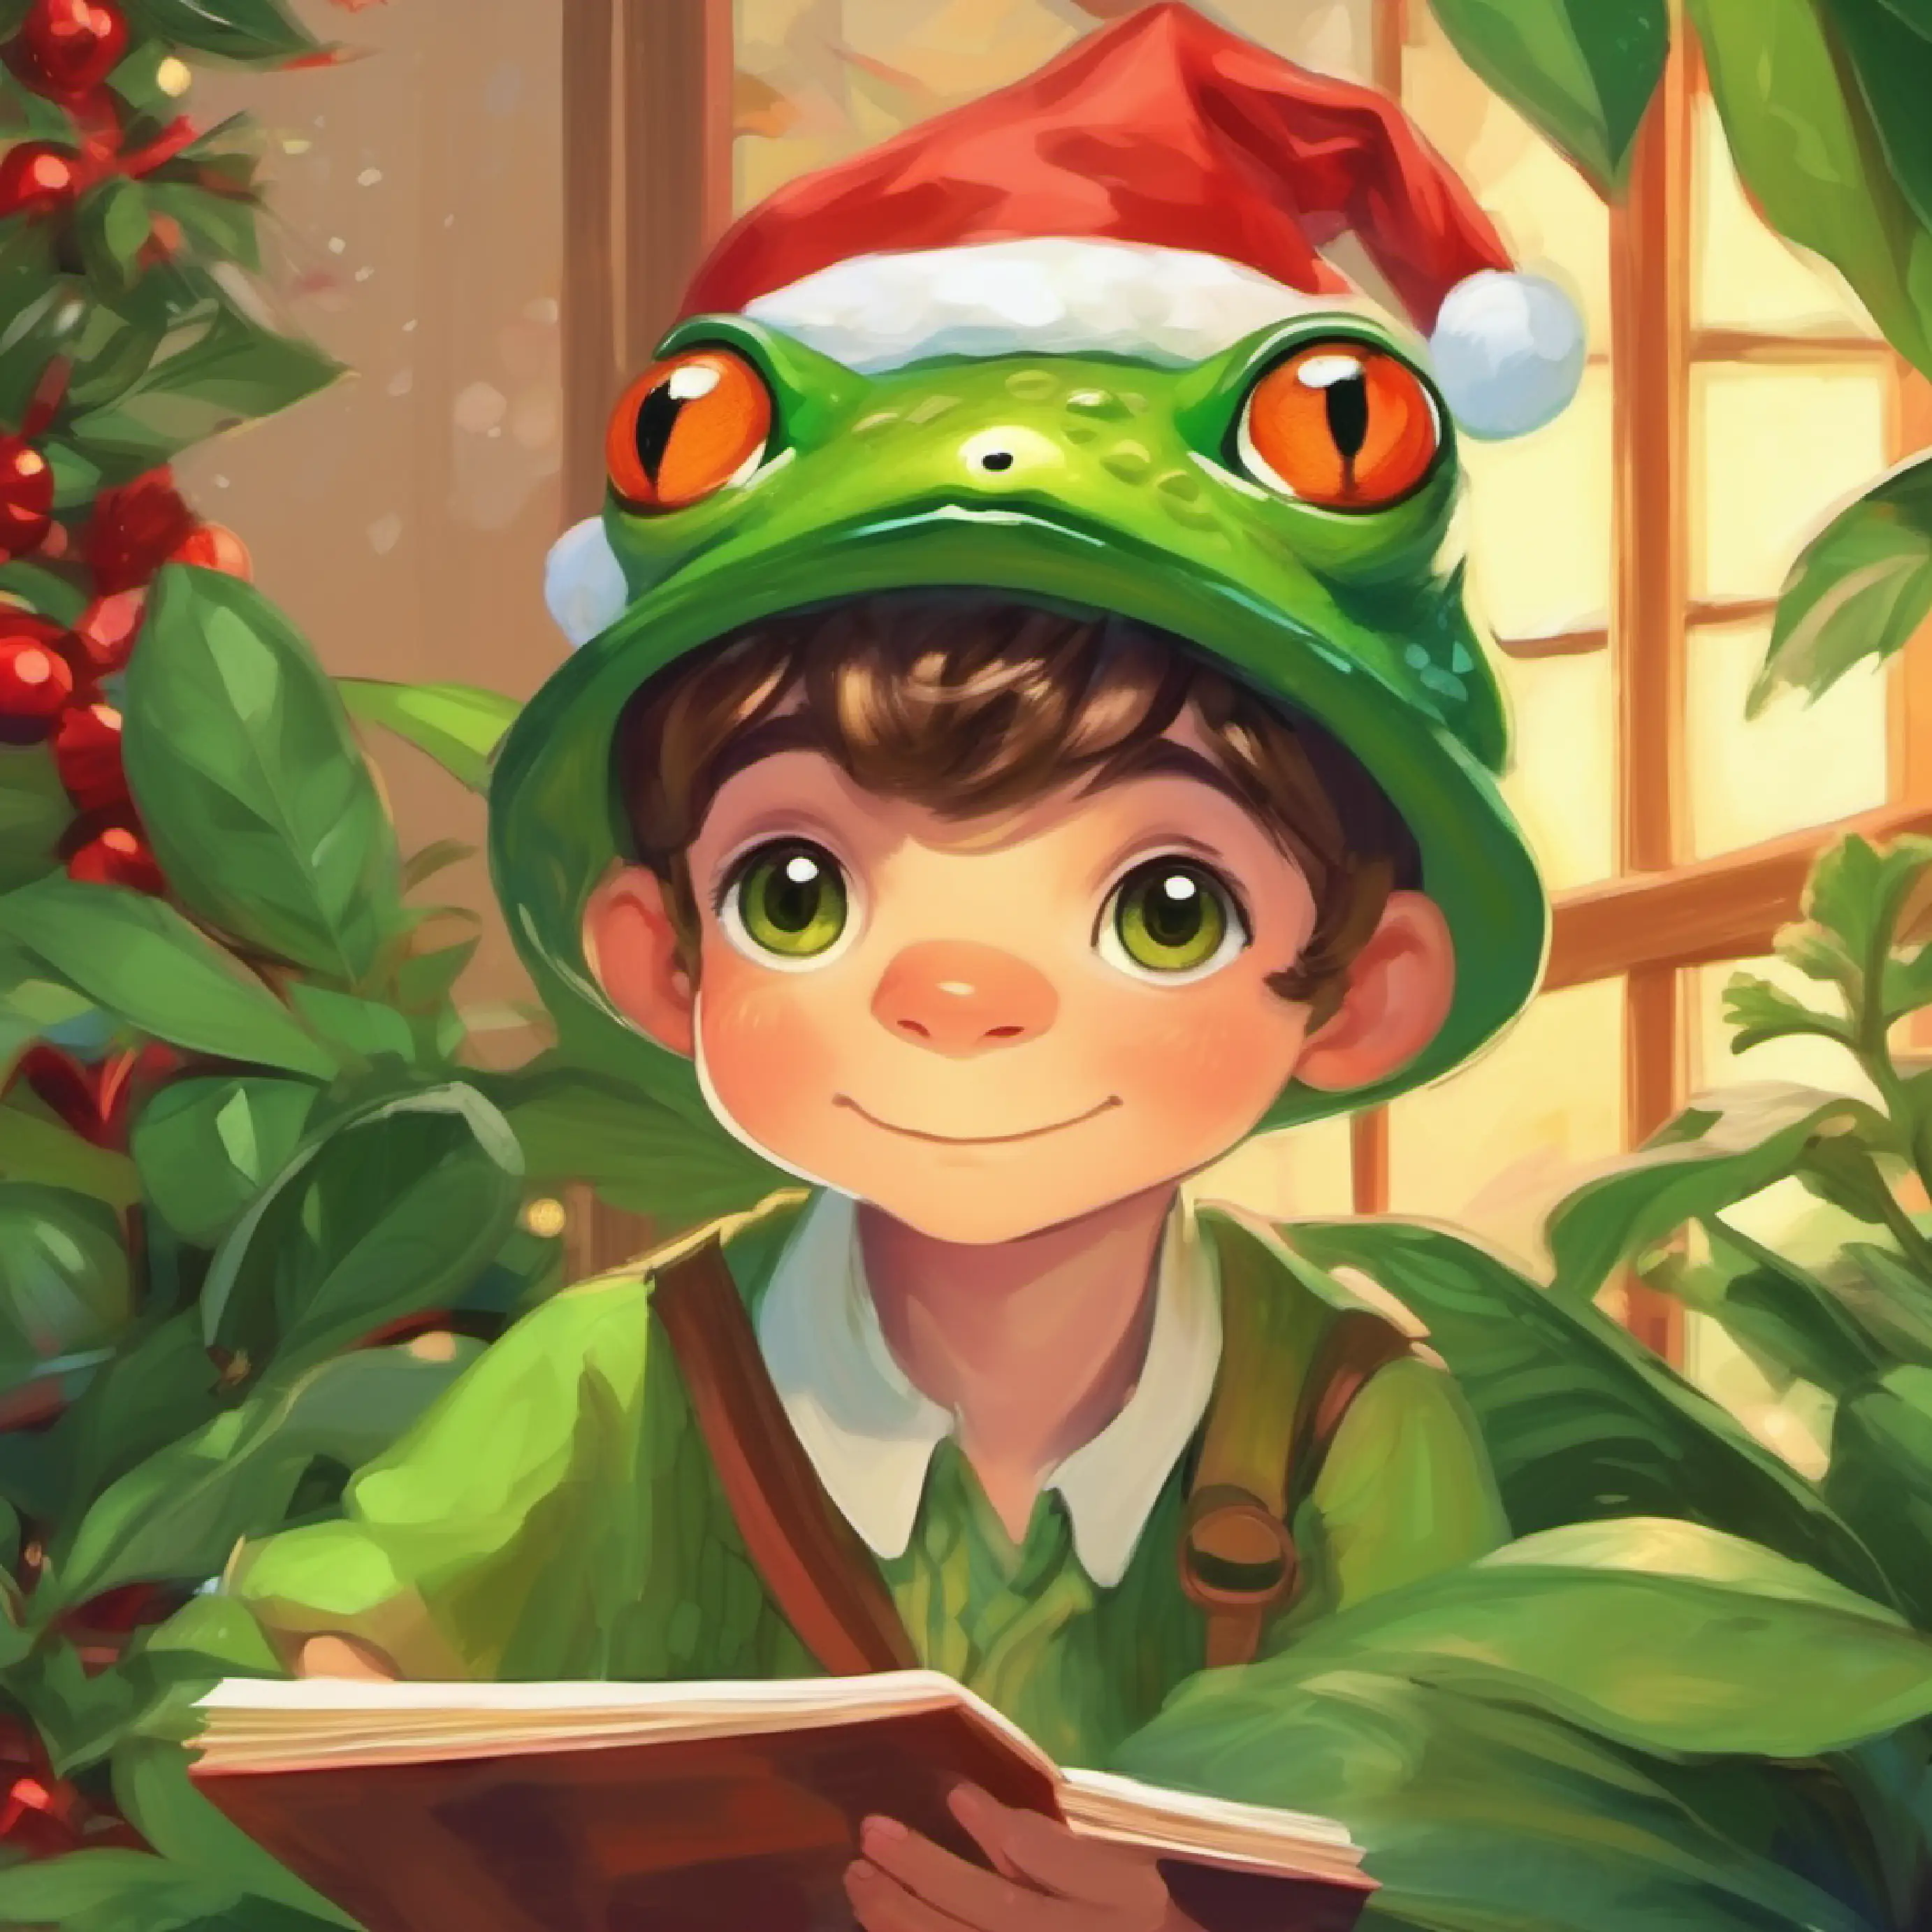 A frog makes a ribbit sound, drawing Young boy with brown hair, fair skin, and green eyes's attention.